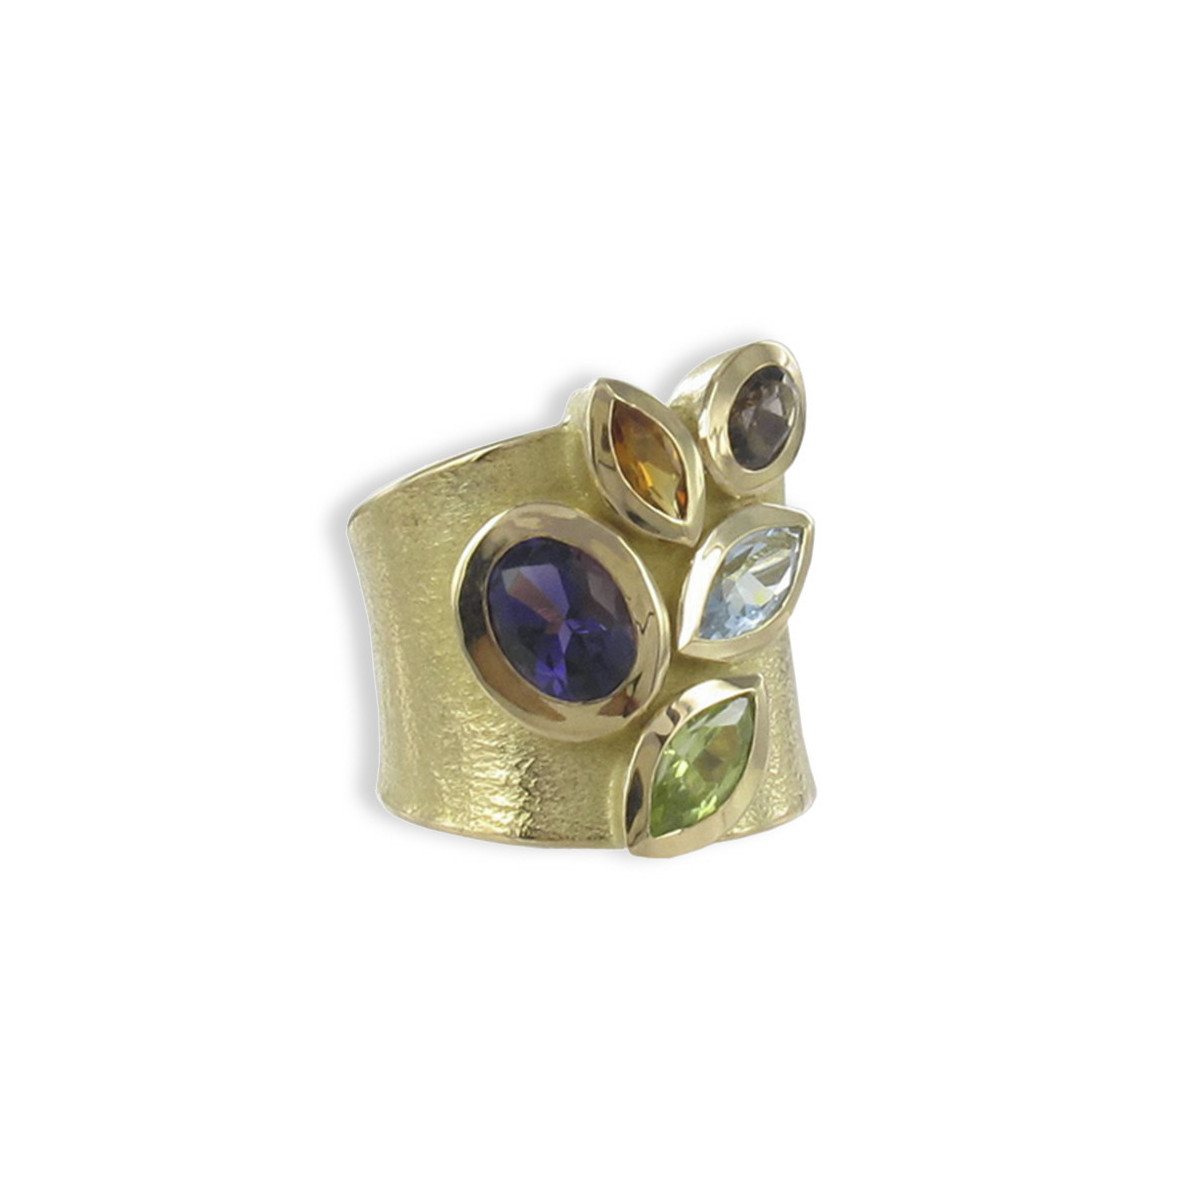 MATT GOLD RING AND STONES IN VARIED COLOR